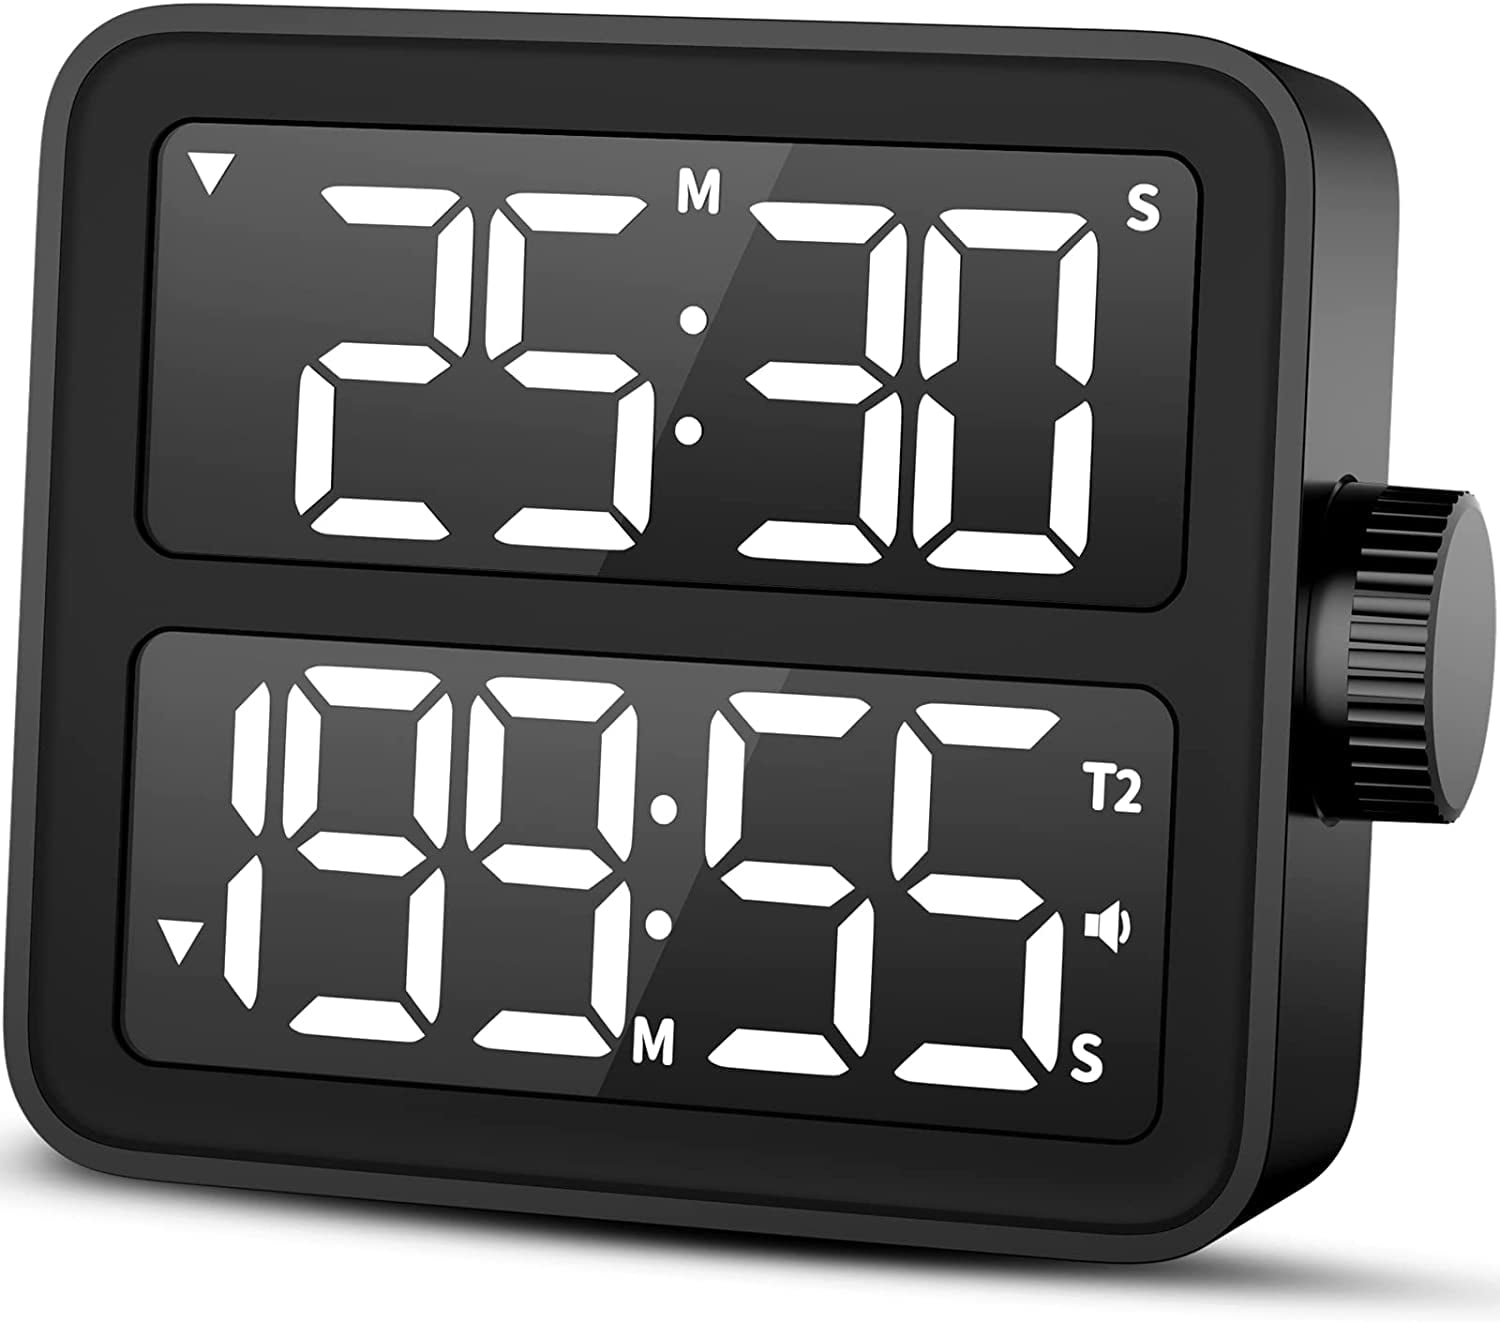 VOCOO Digital Dual Kitchen Timer, Dual UP/Down Stopwatch with large Display, Adjustable Volume and Brightness, Magnetic Digital Timer for Cooking, School, Classroom - Black Walmart.com